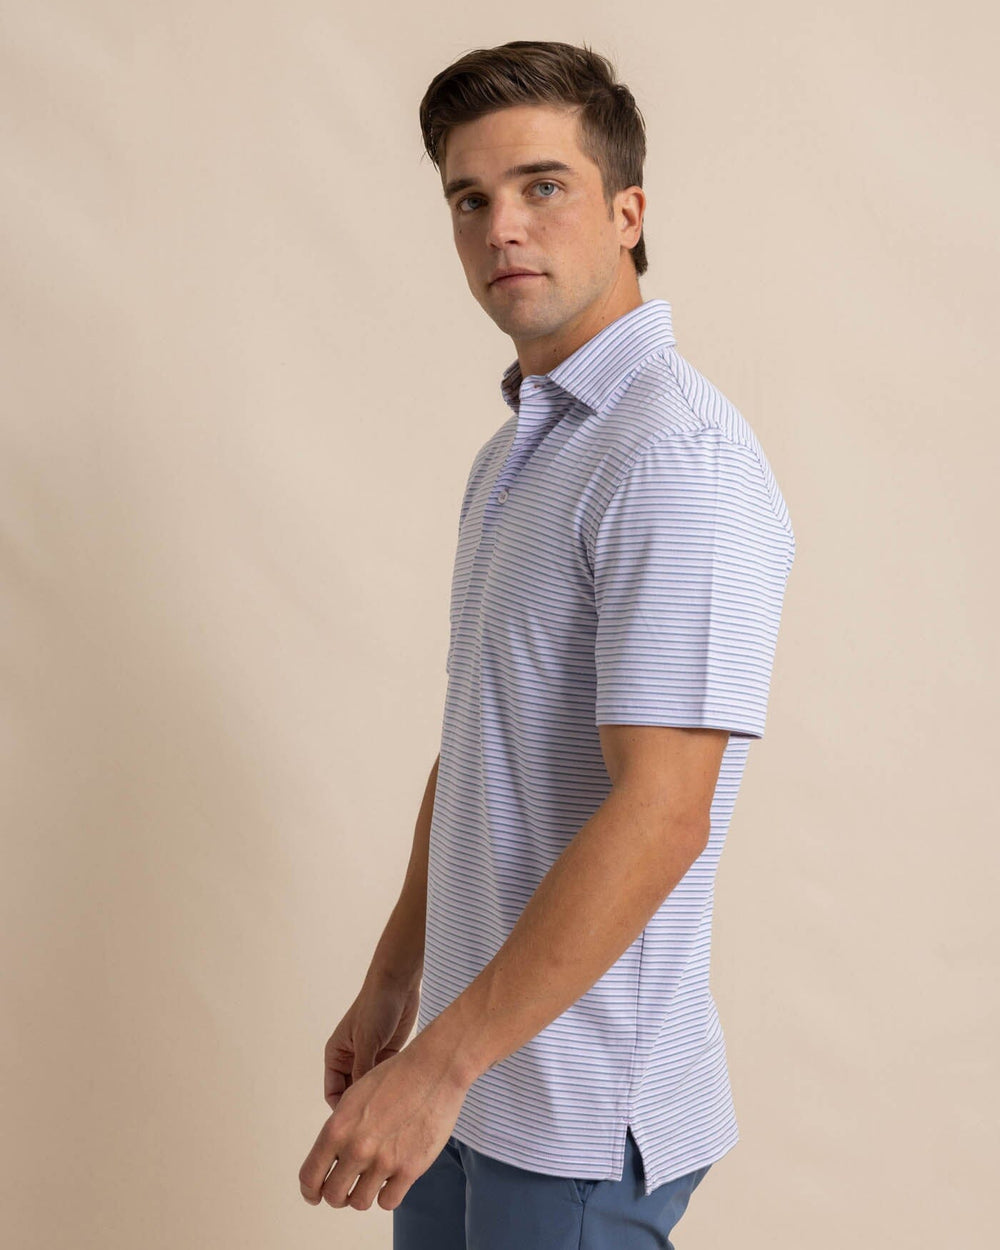 The front view of the Southern Tide Ryder Heather Halls Performance Polo by Southern Tide - Heather Orchid Petal